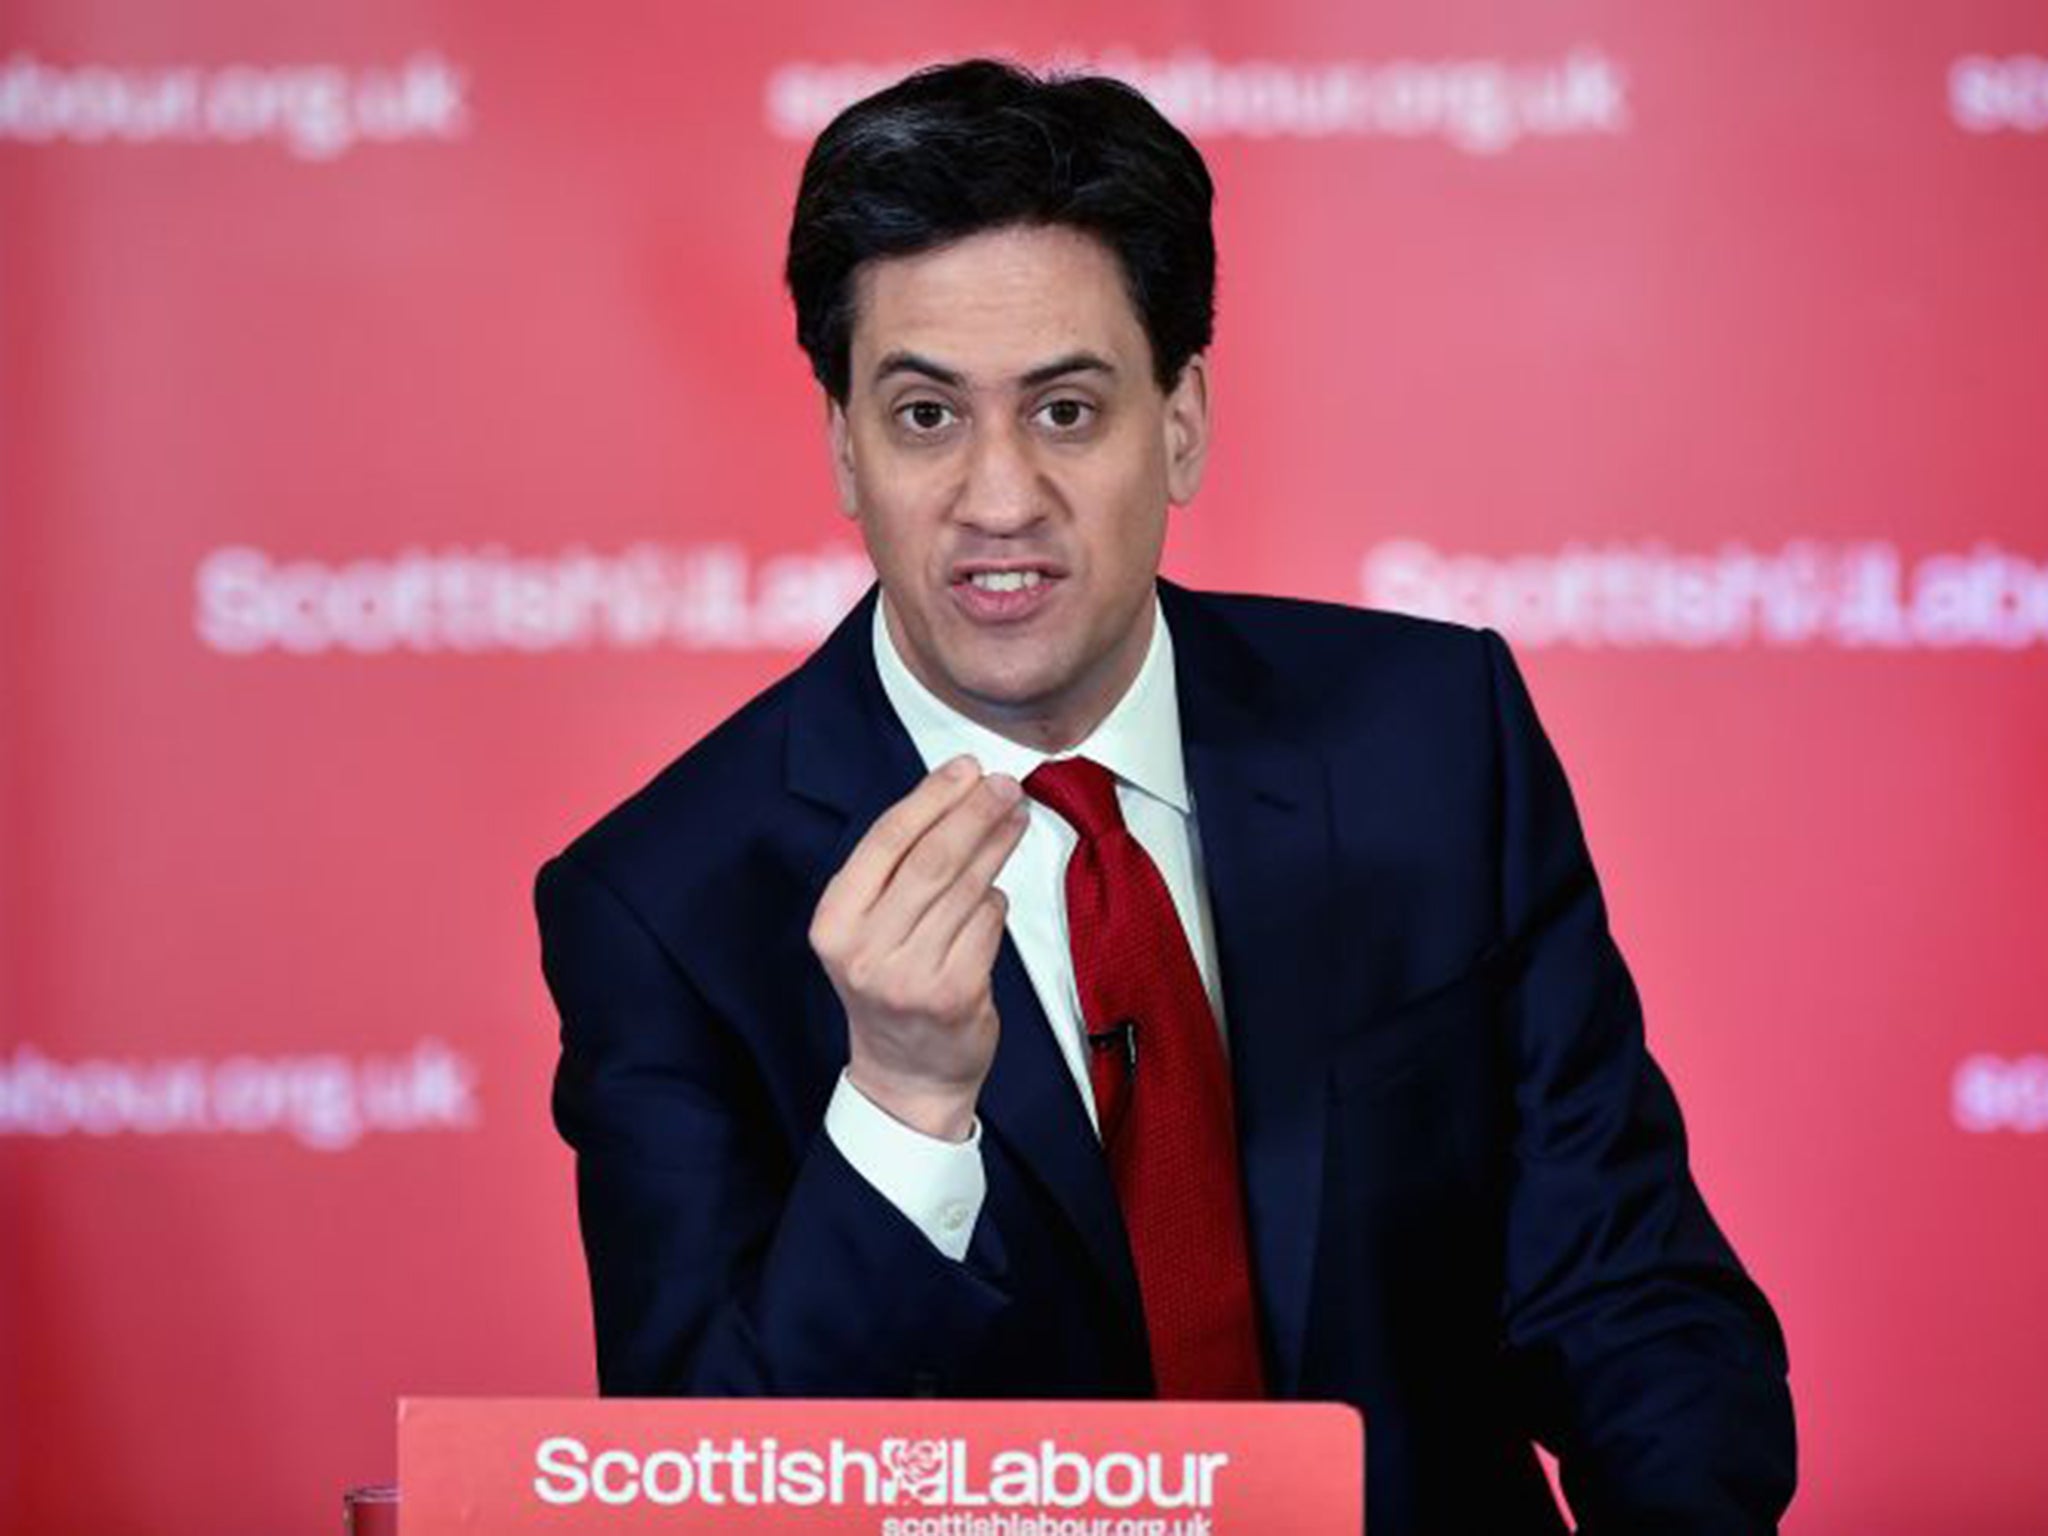 Miliband claims there is ‘an unholy alliance’ between the SNP and the Conservatives